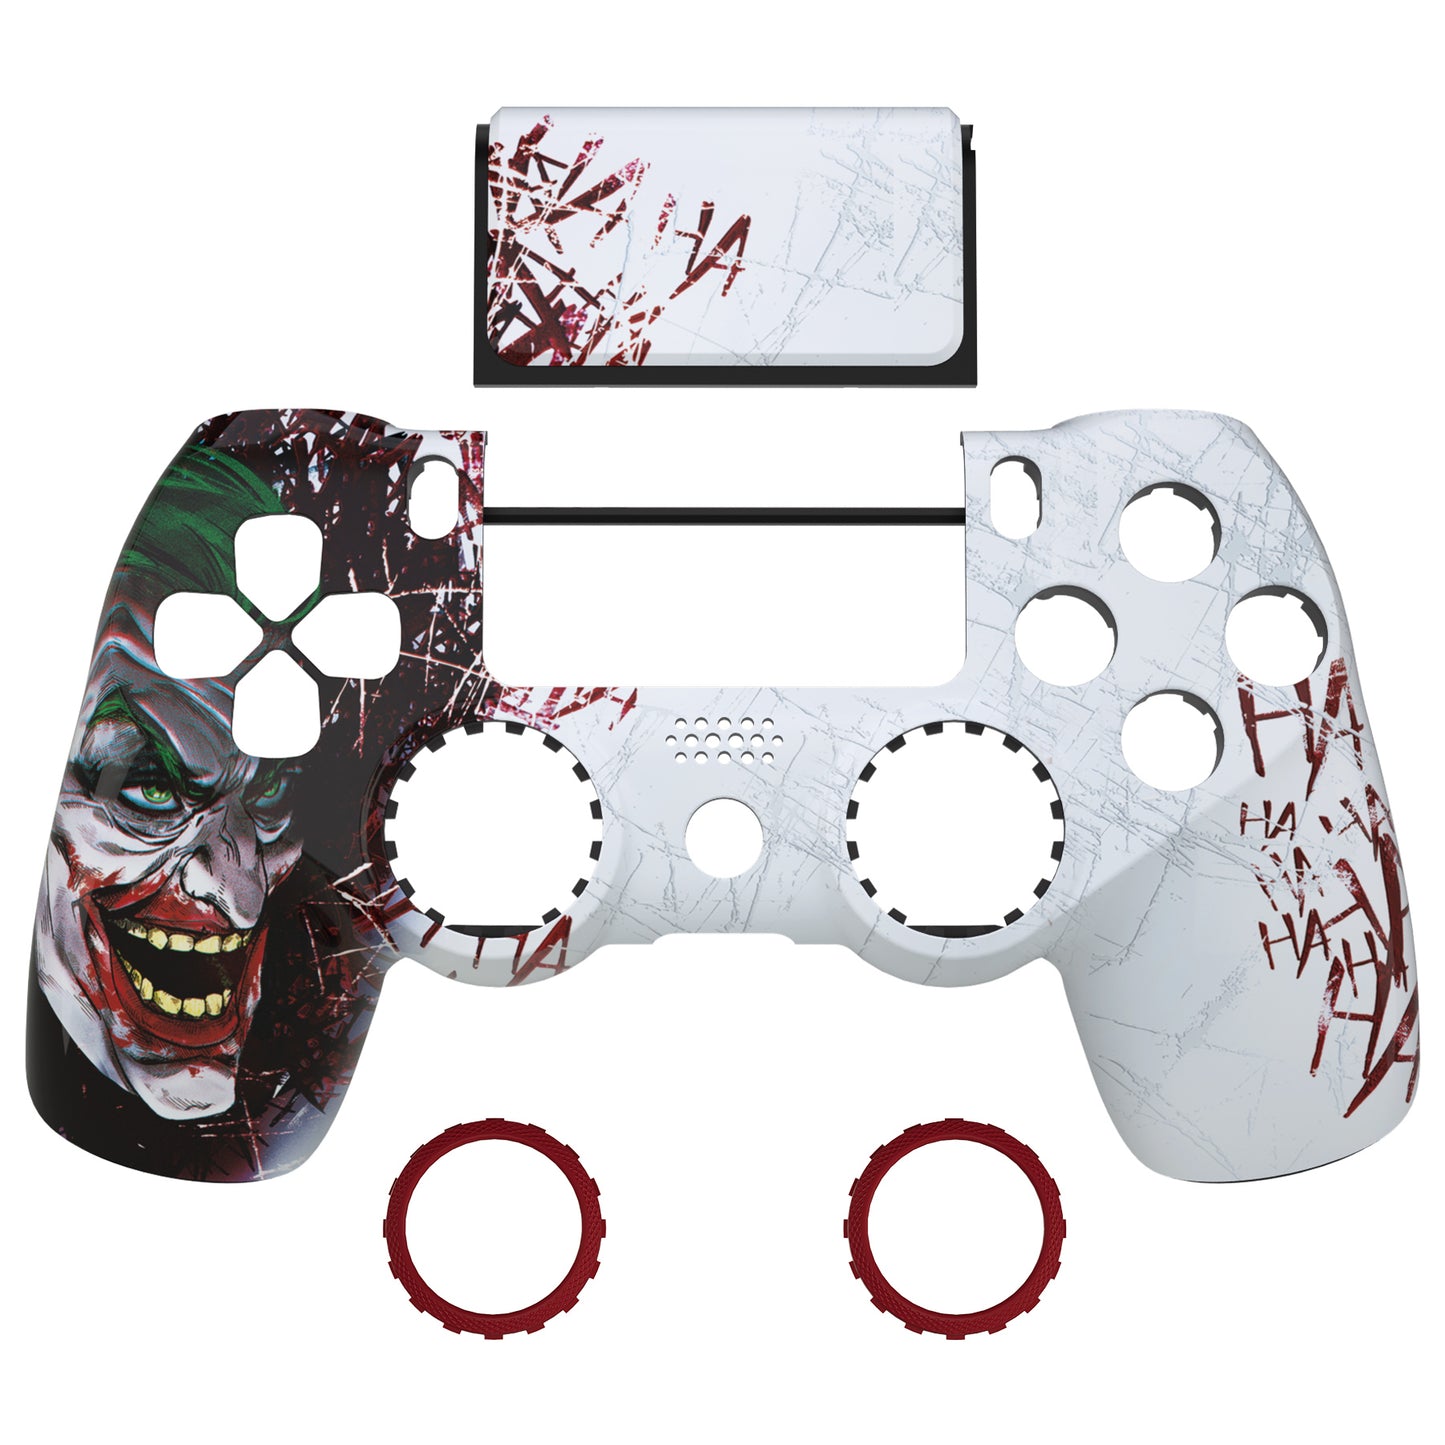 eXtremeRate Ghost Redesigned Front Housing Shell with Touch Pad Compatible with PS4 Slim Pro Controller JDM-040/050/055 - Clown HAHAHA eXtremeRate